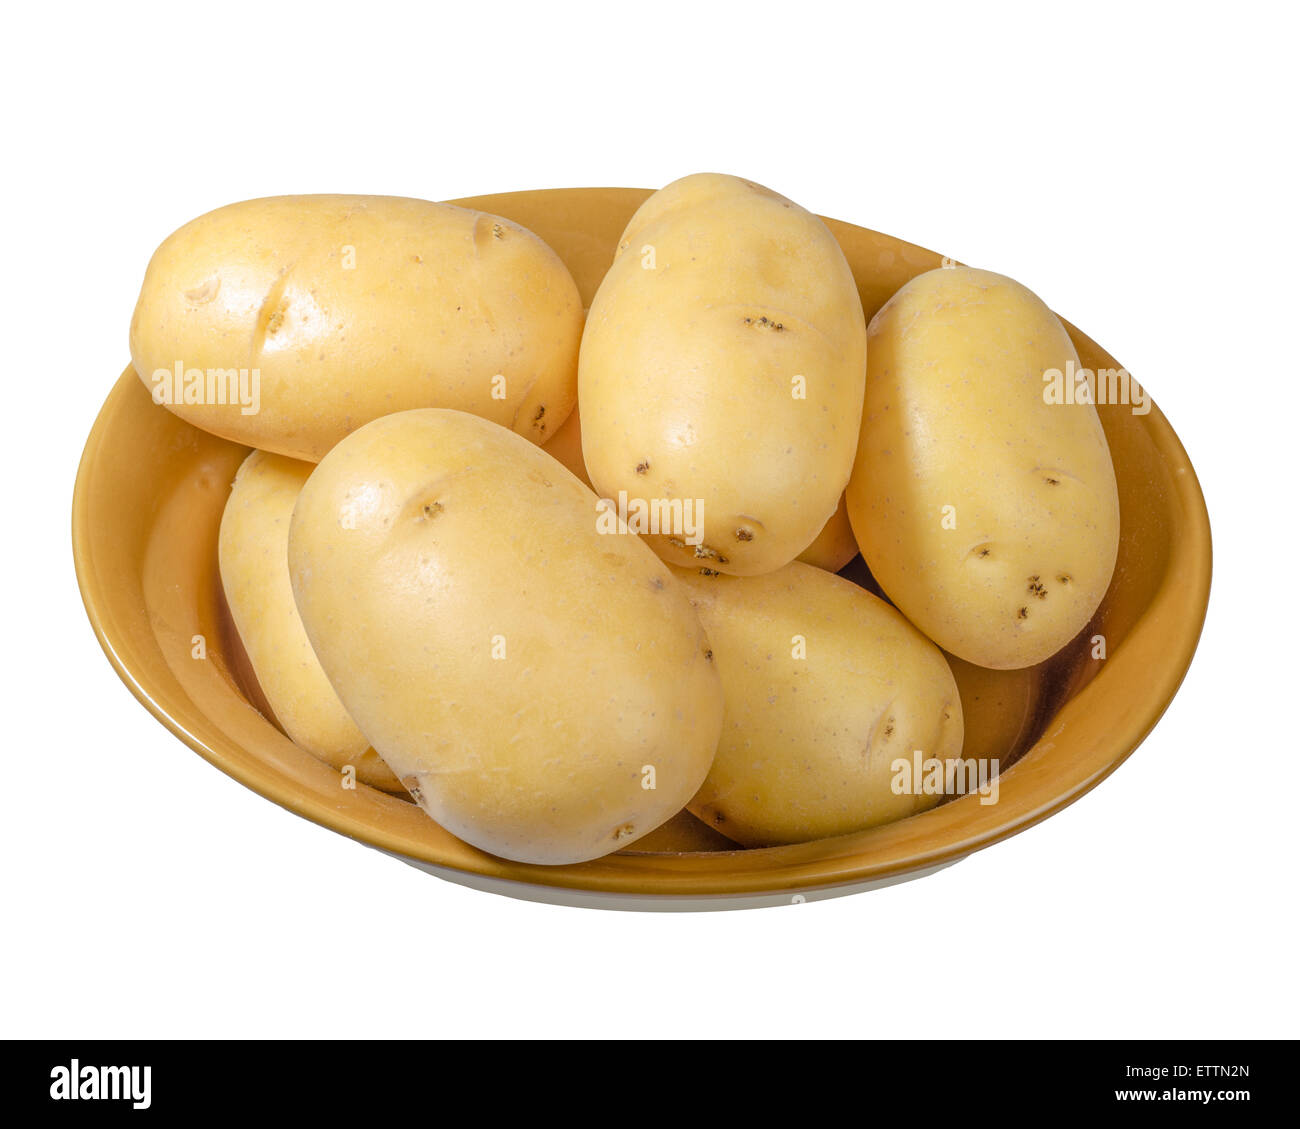 White potatoes fresh picked in a bowl isolated on white Stock Photo